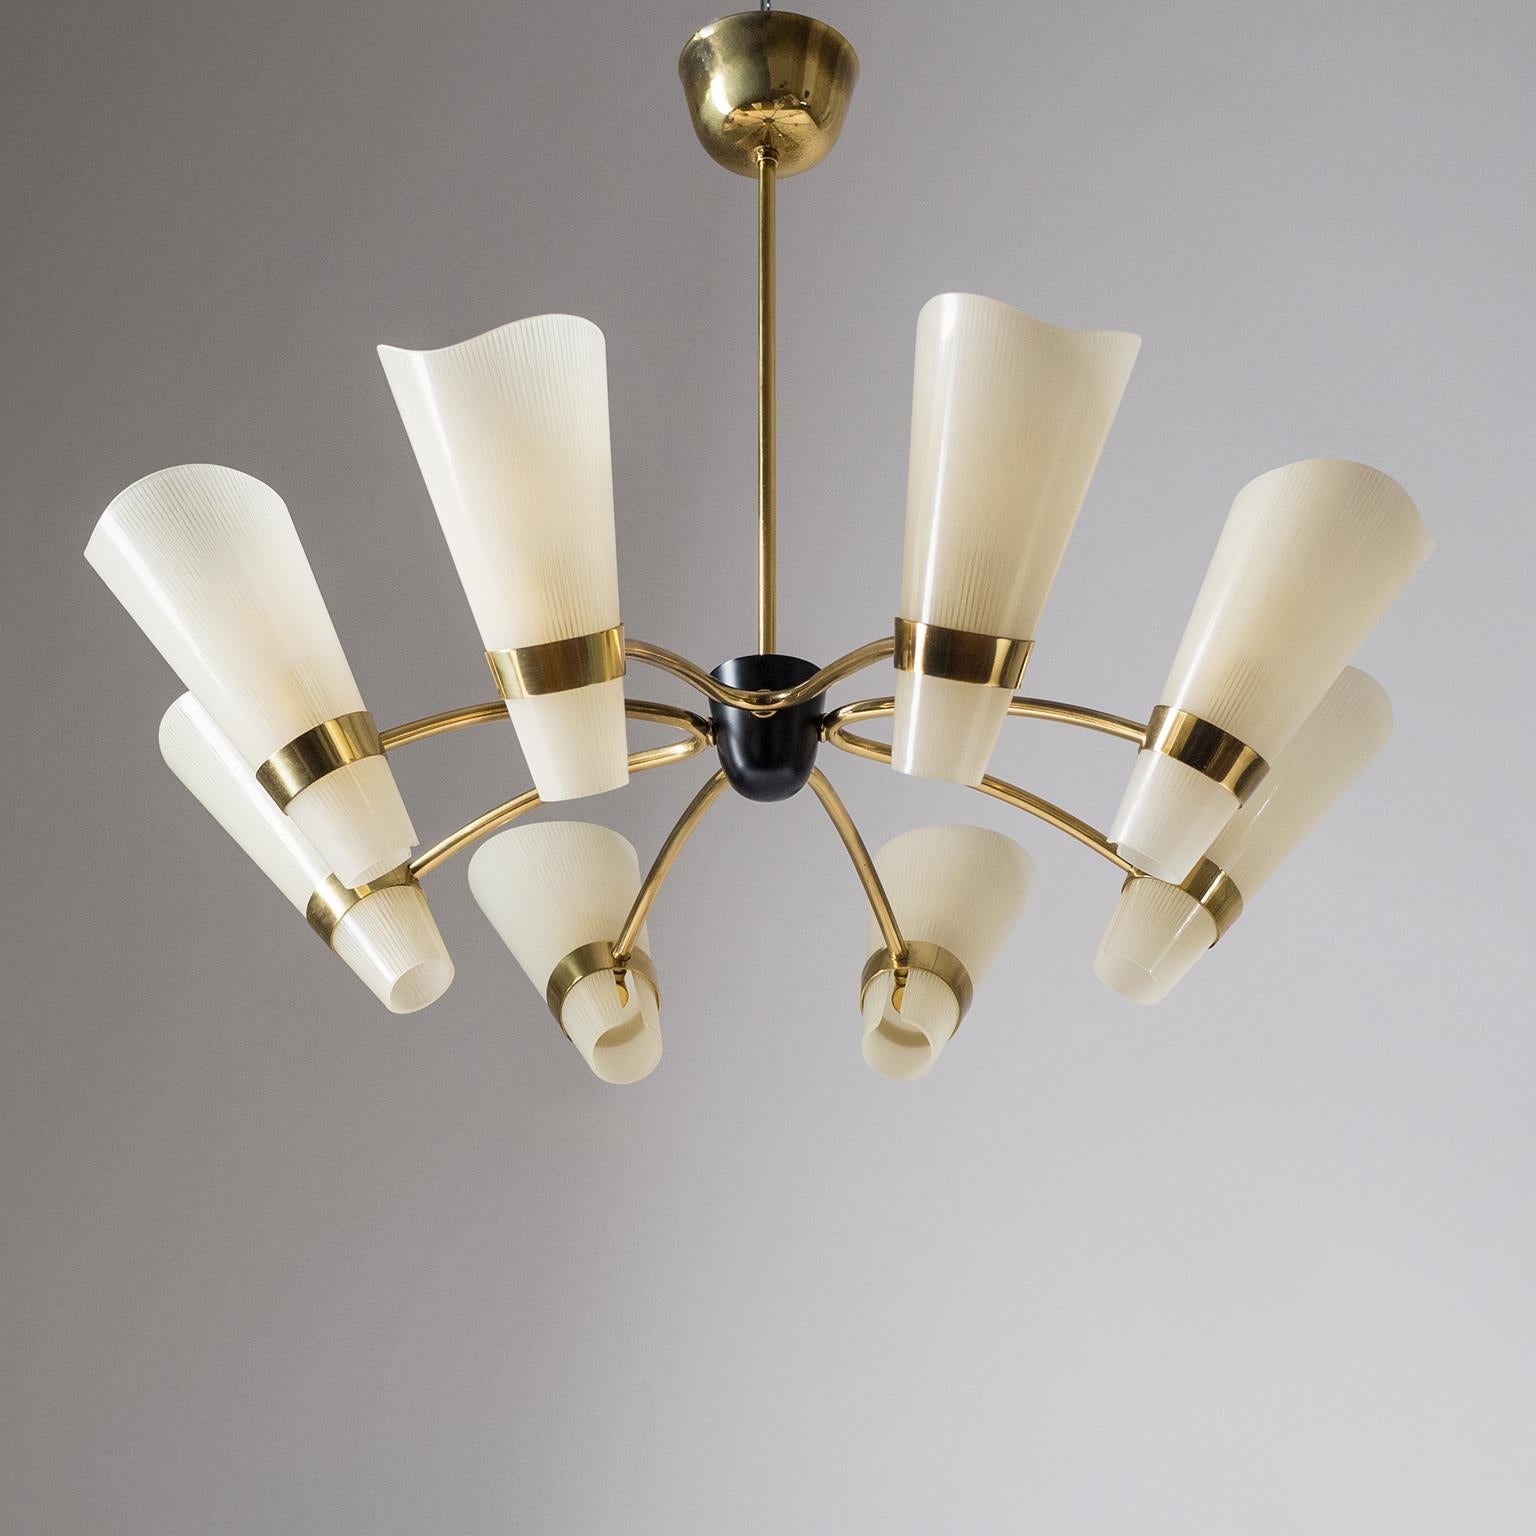 Lovely eight-arm brass chandelier from the late 1950s or early 1960s. The glass diffusers are enameled in ivory with a pin-stripe pattern and have a satin finish on the inside. Very good original condition with a light patina on the brass. Eight